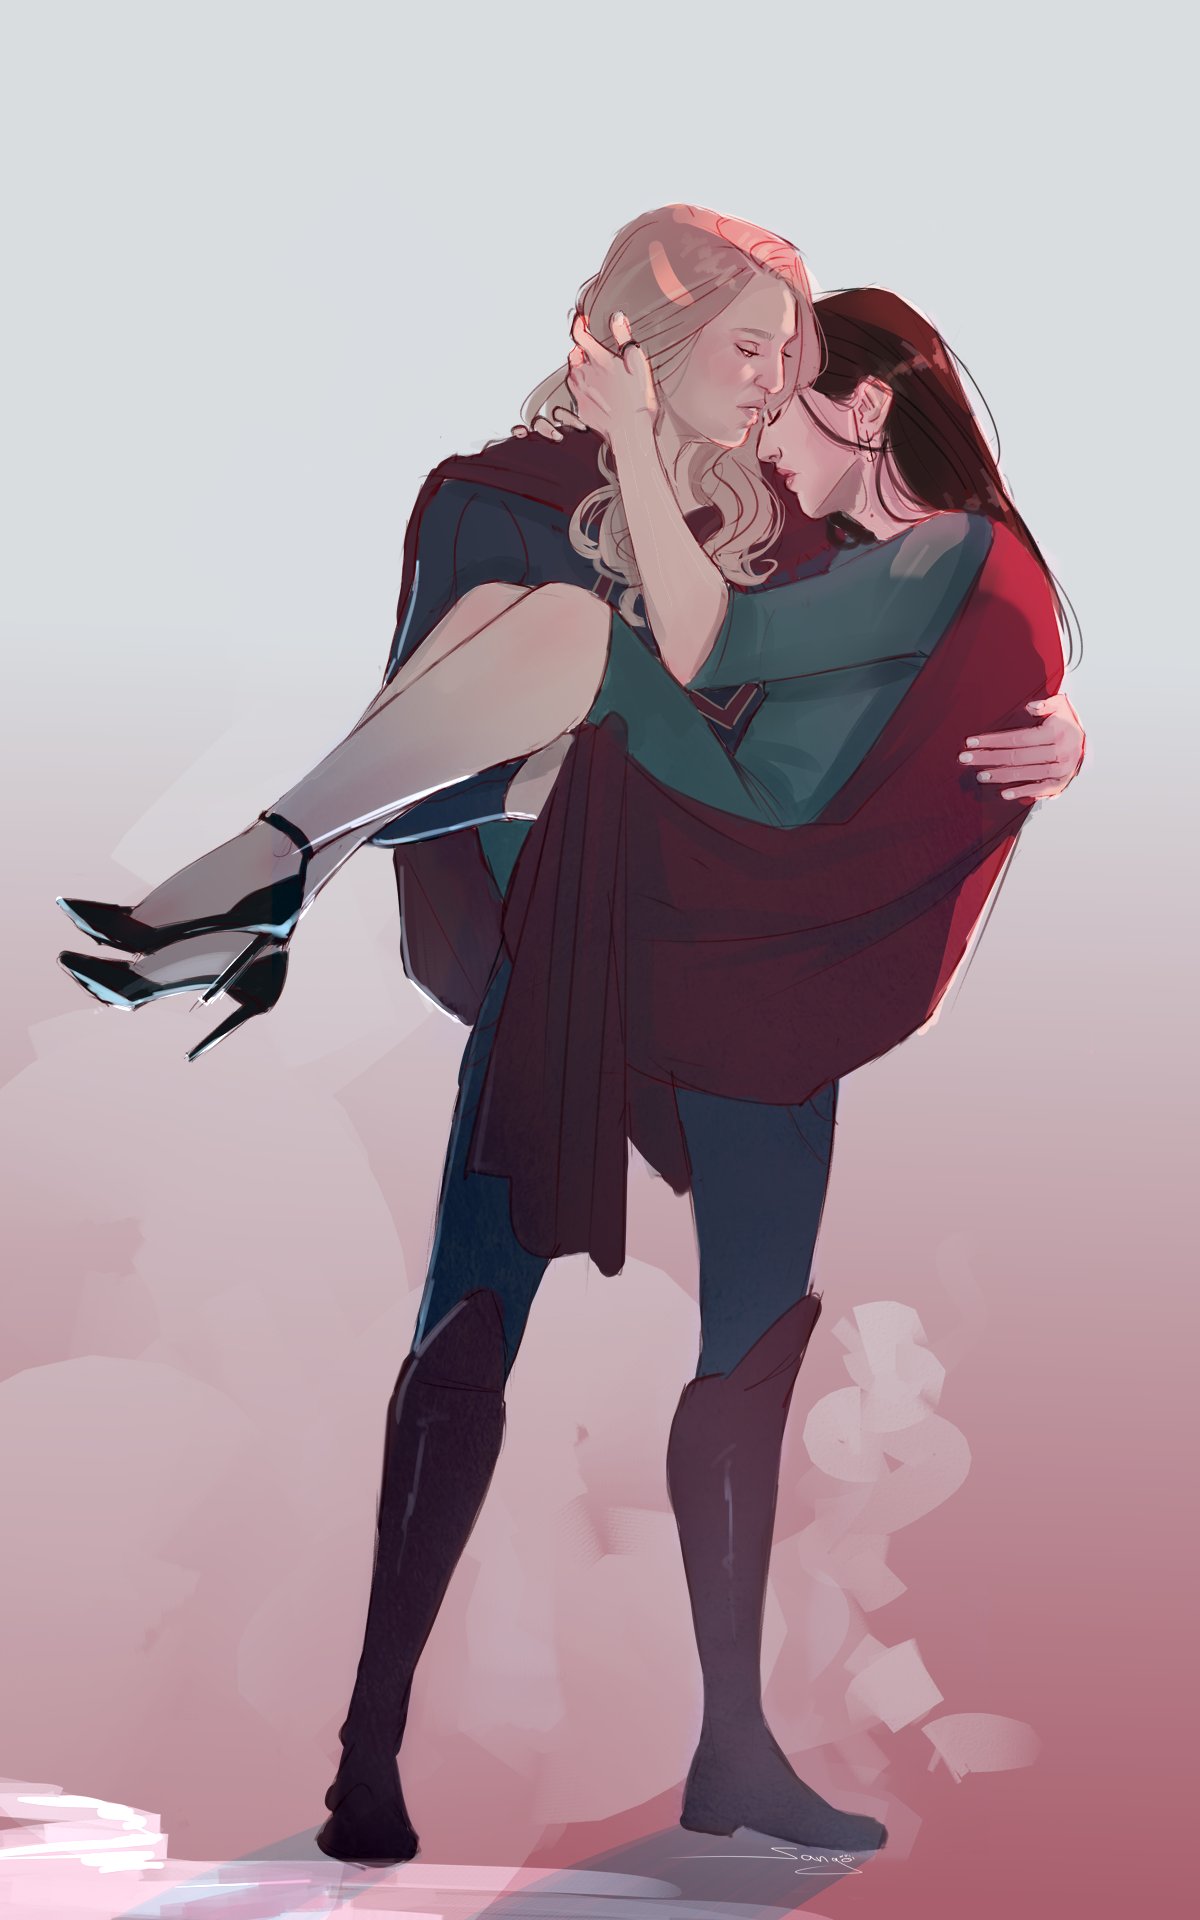 supercorp on Twitter.